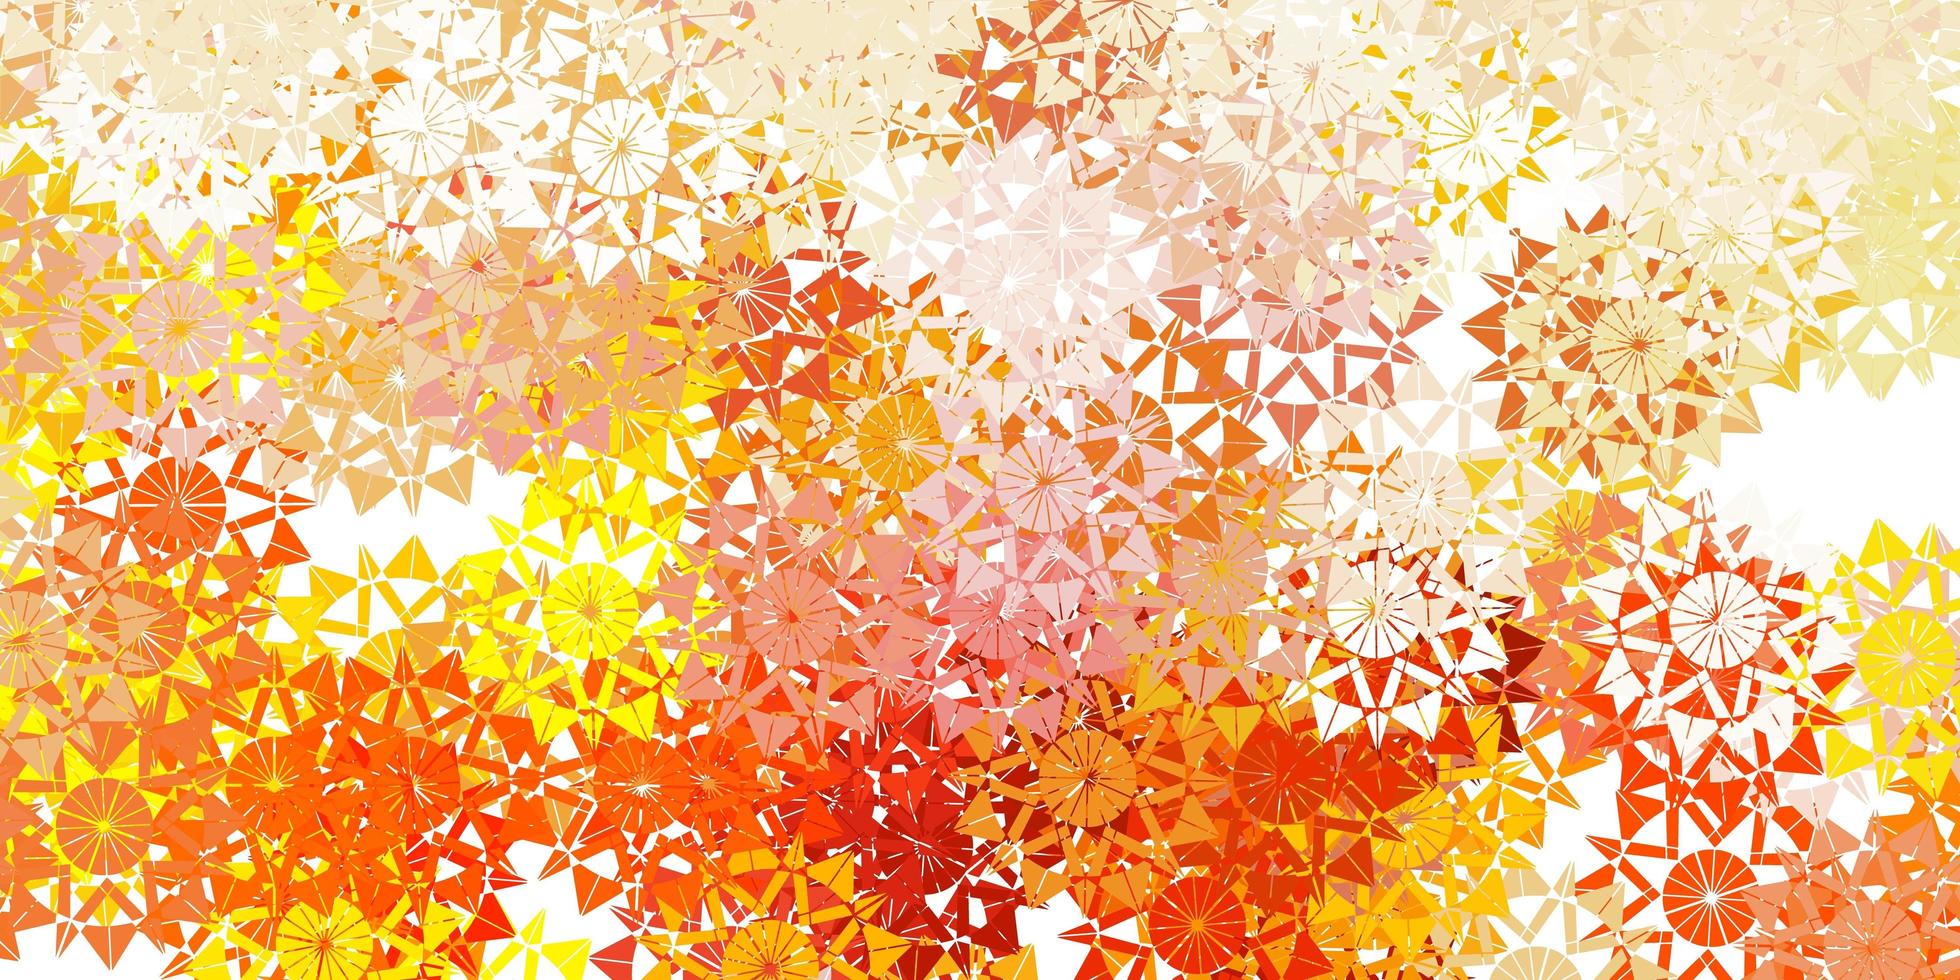 Light yellow vector pattern with colored snowflakes.